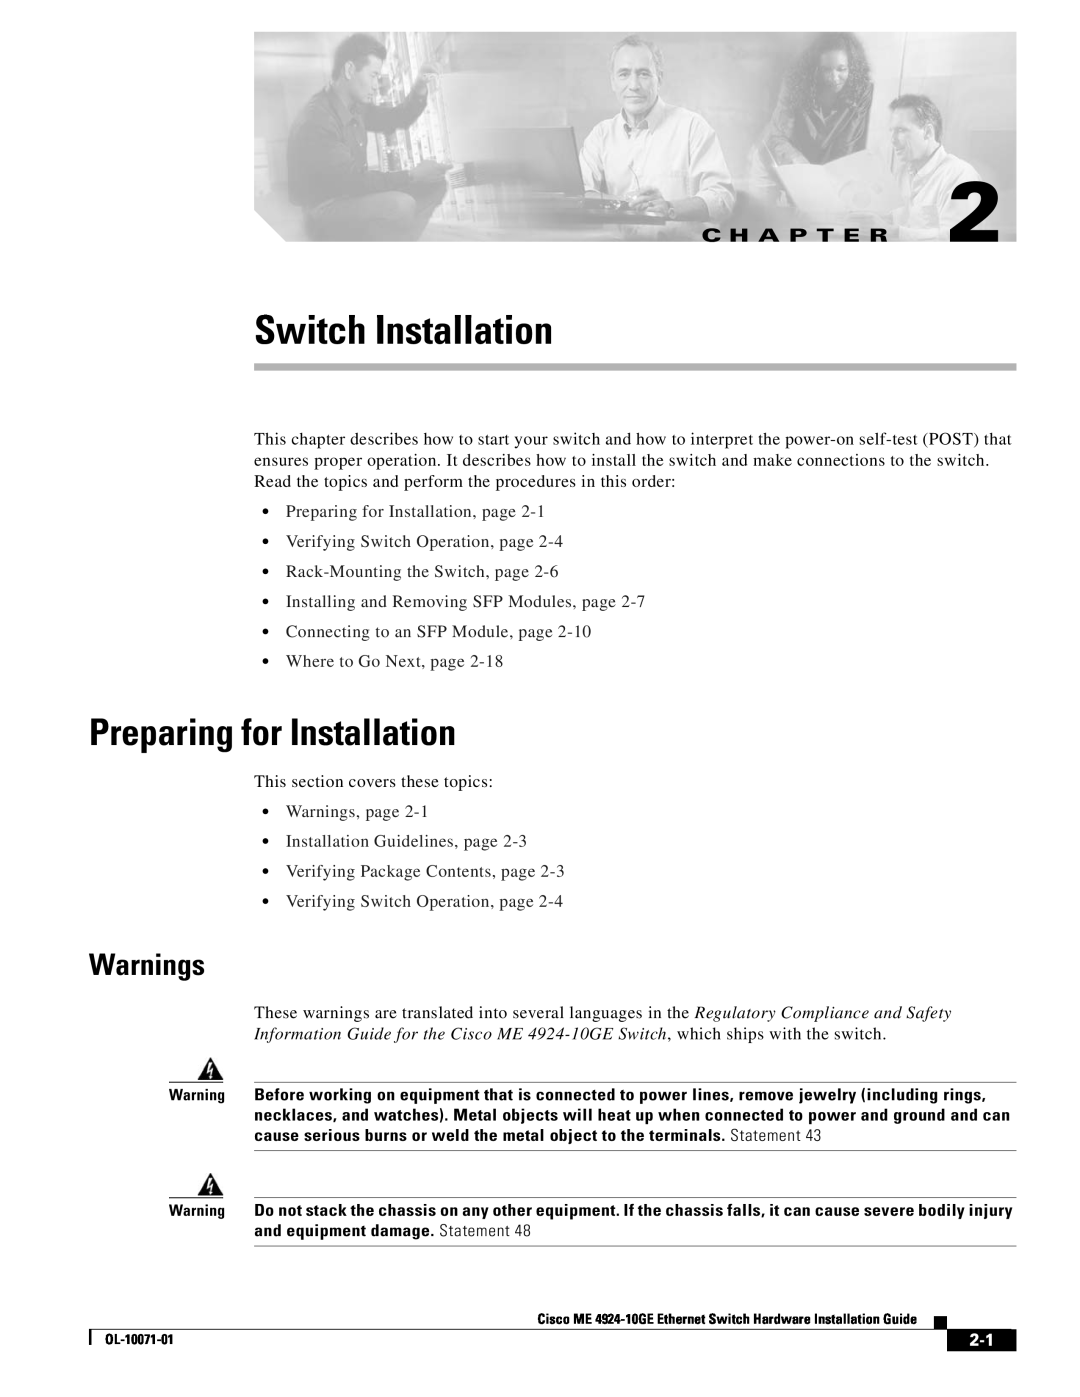 Cisco Systems ME 4924-10GE manual Switch Installation, Preparing for Installation, Warnings, Rack-Mounting the Switch, page 